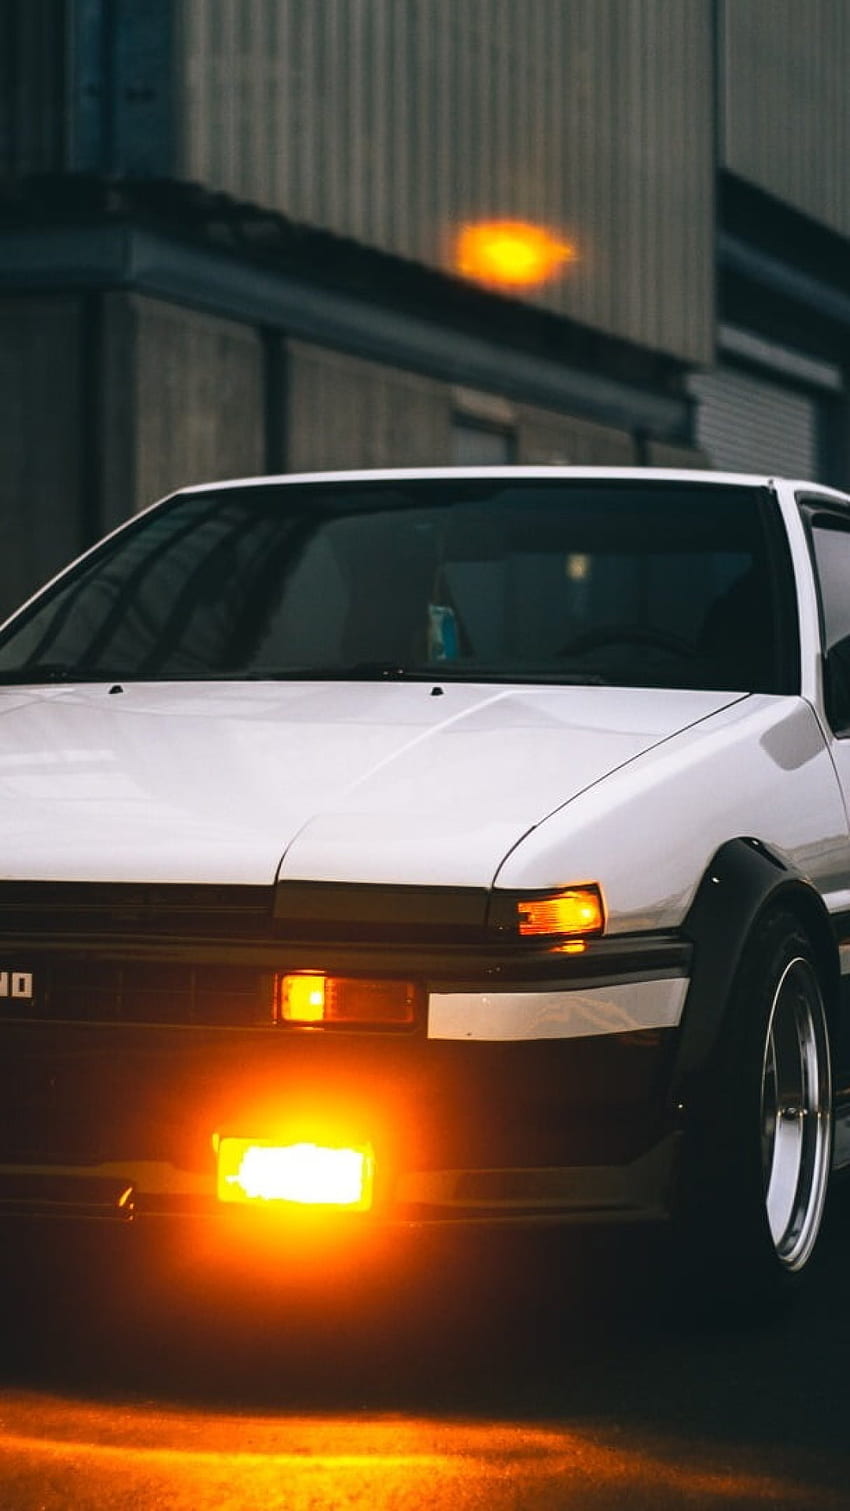 Toyota Sprinter Trueno AE86 GT Apex, JDM, Japanese Cars, Sports Car • For You For & Mobile, AE86 Aesthetic HD phone wallpaper